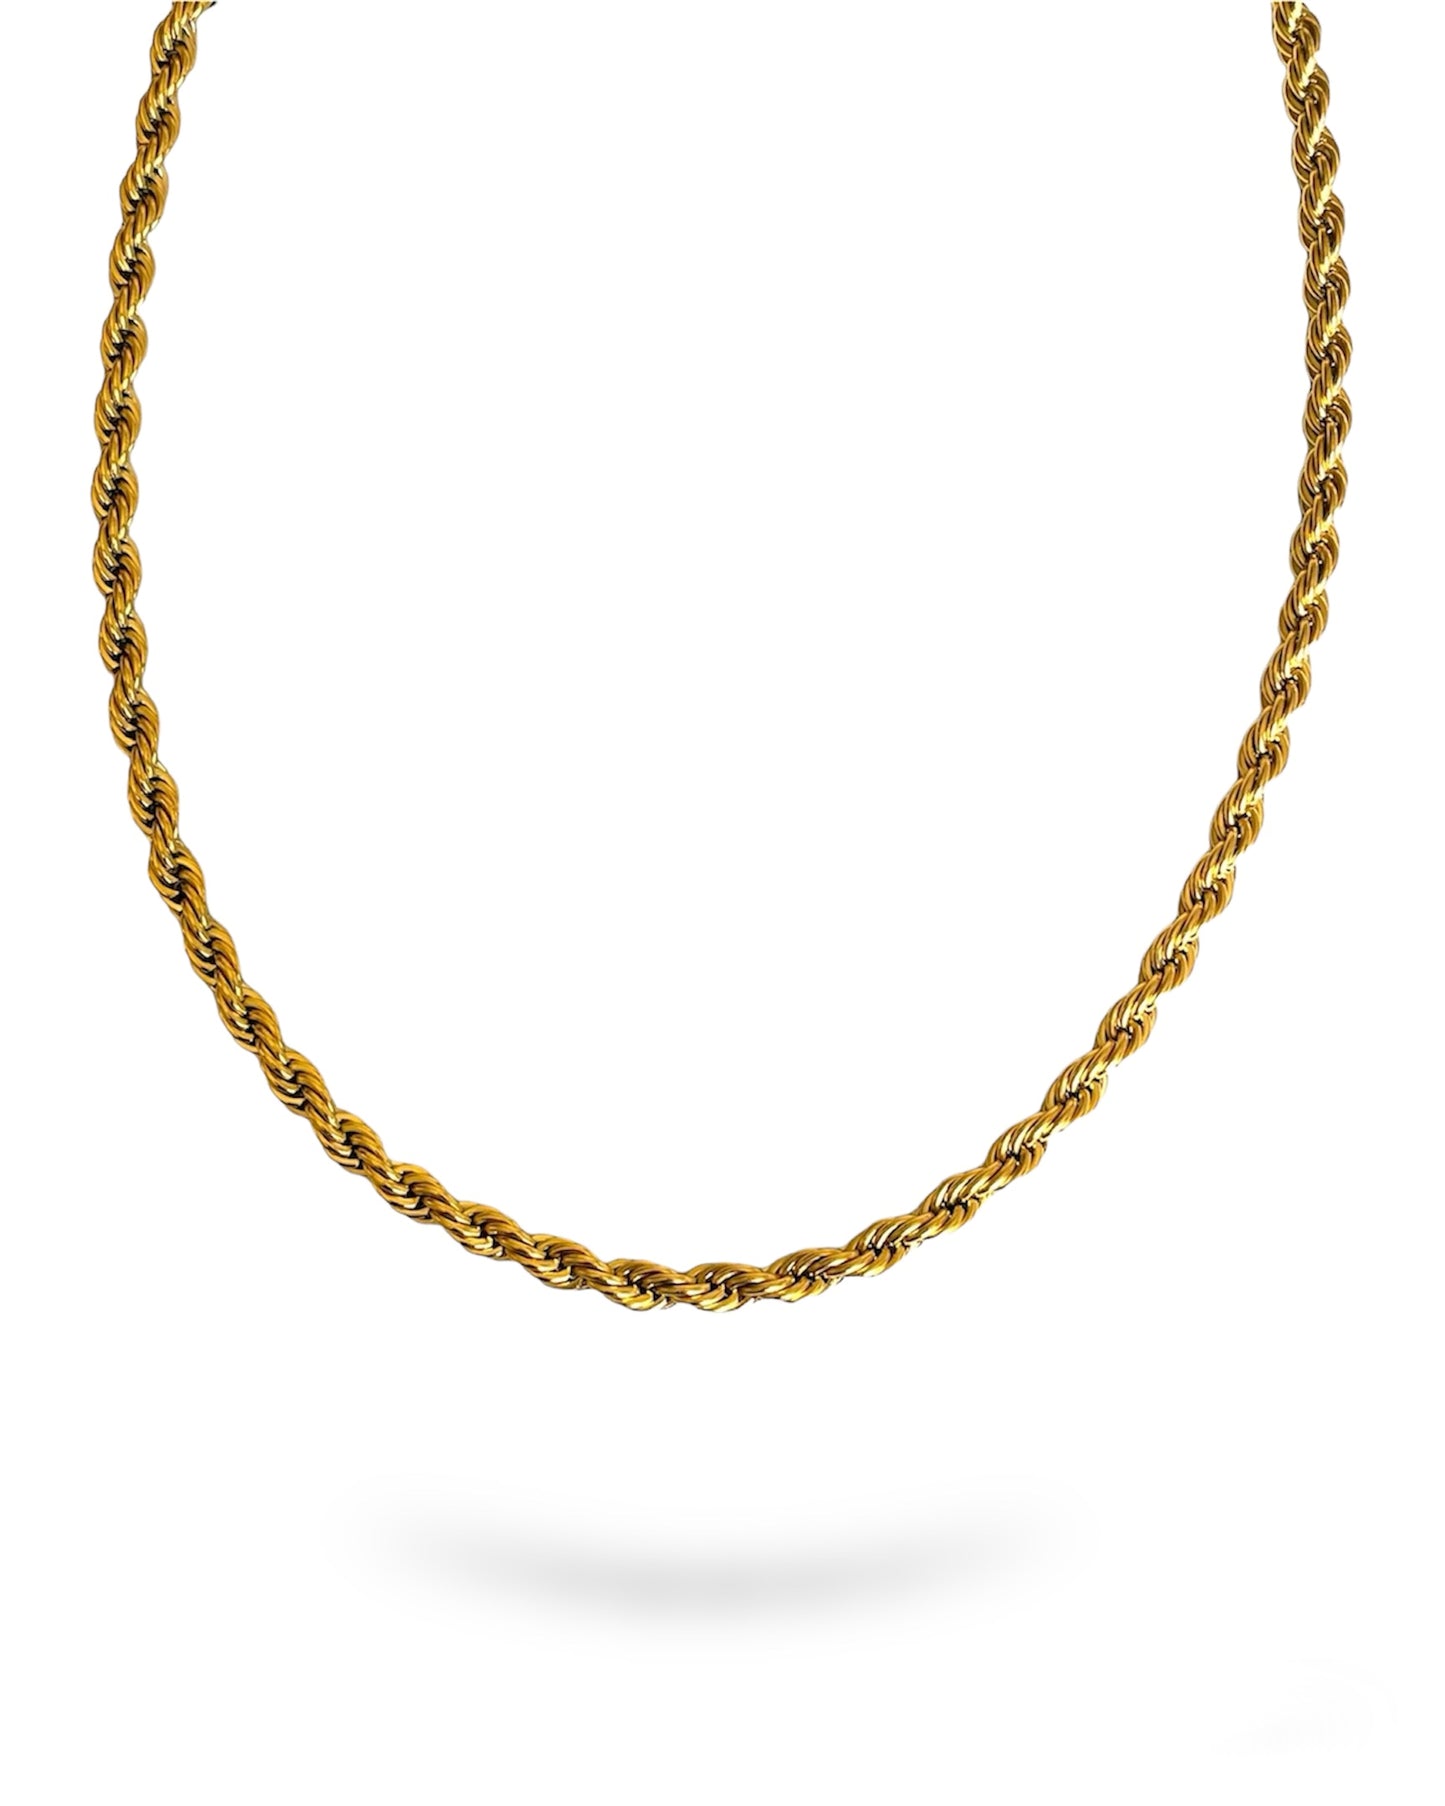 August - Gold Necklace